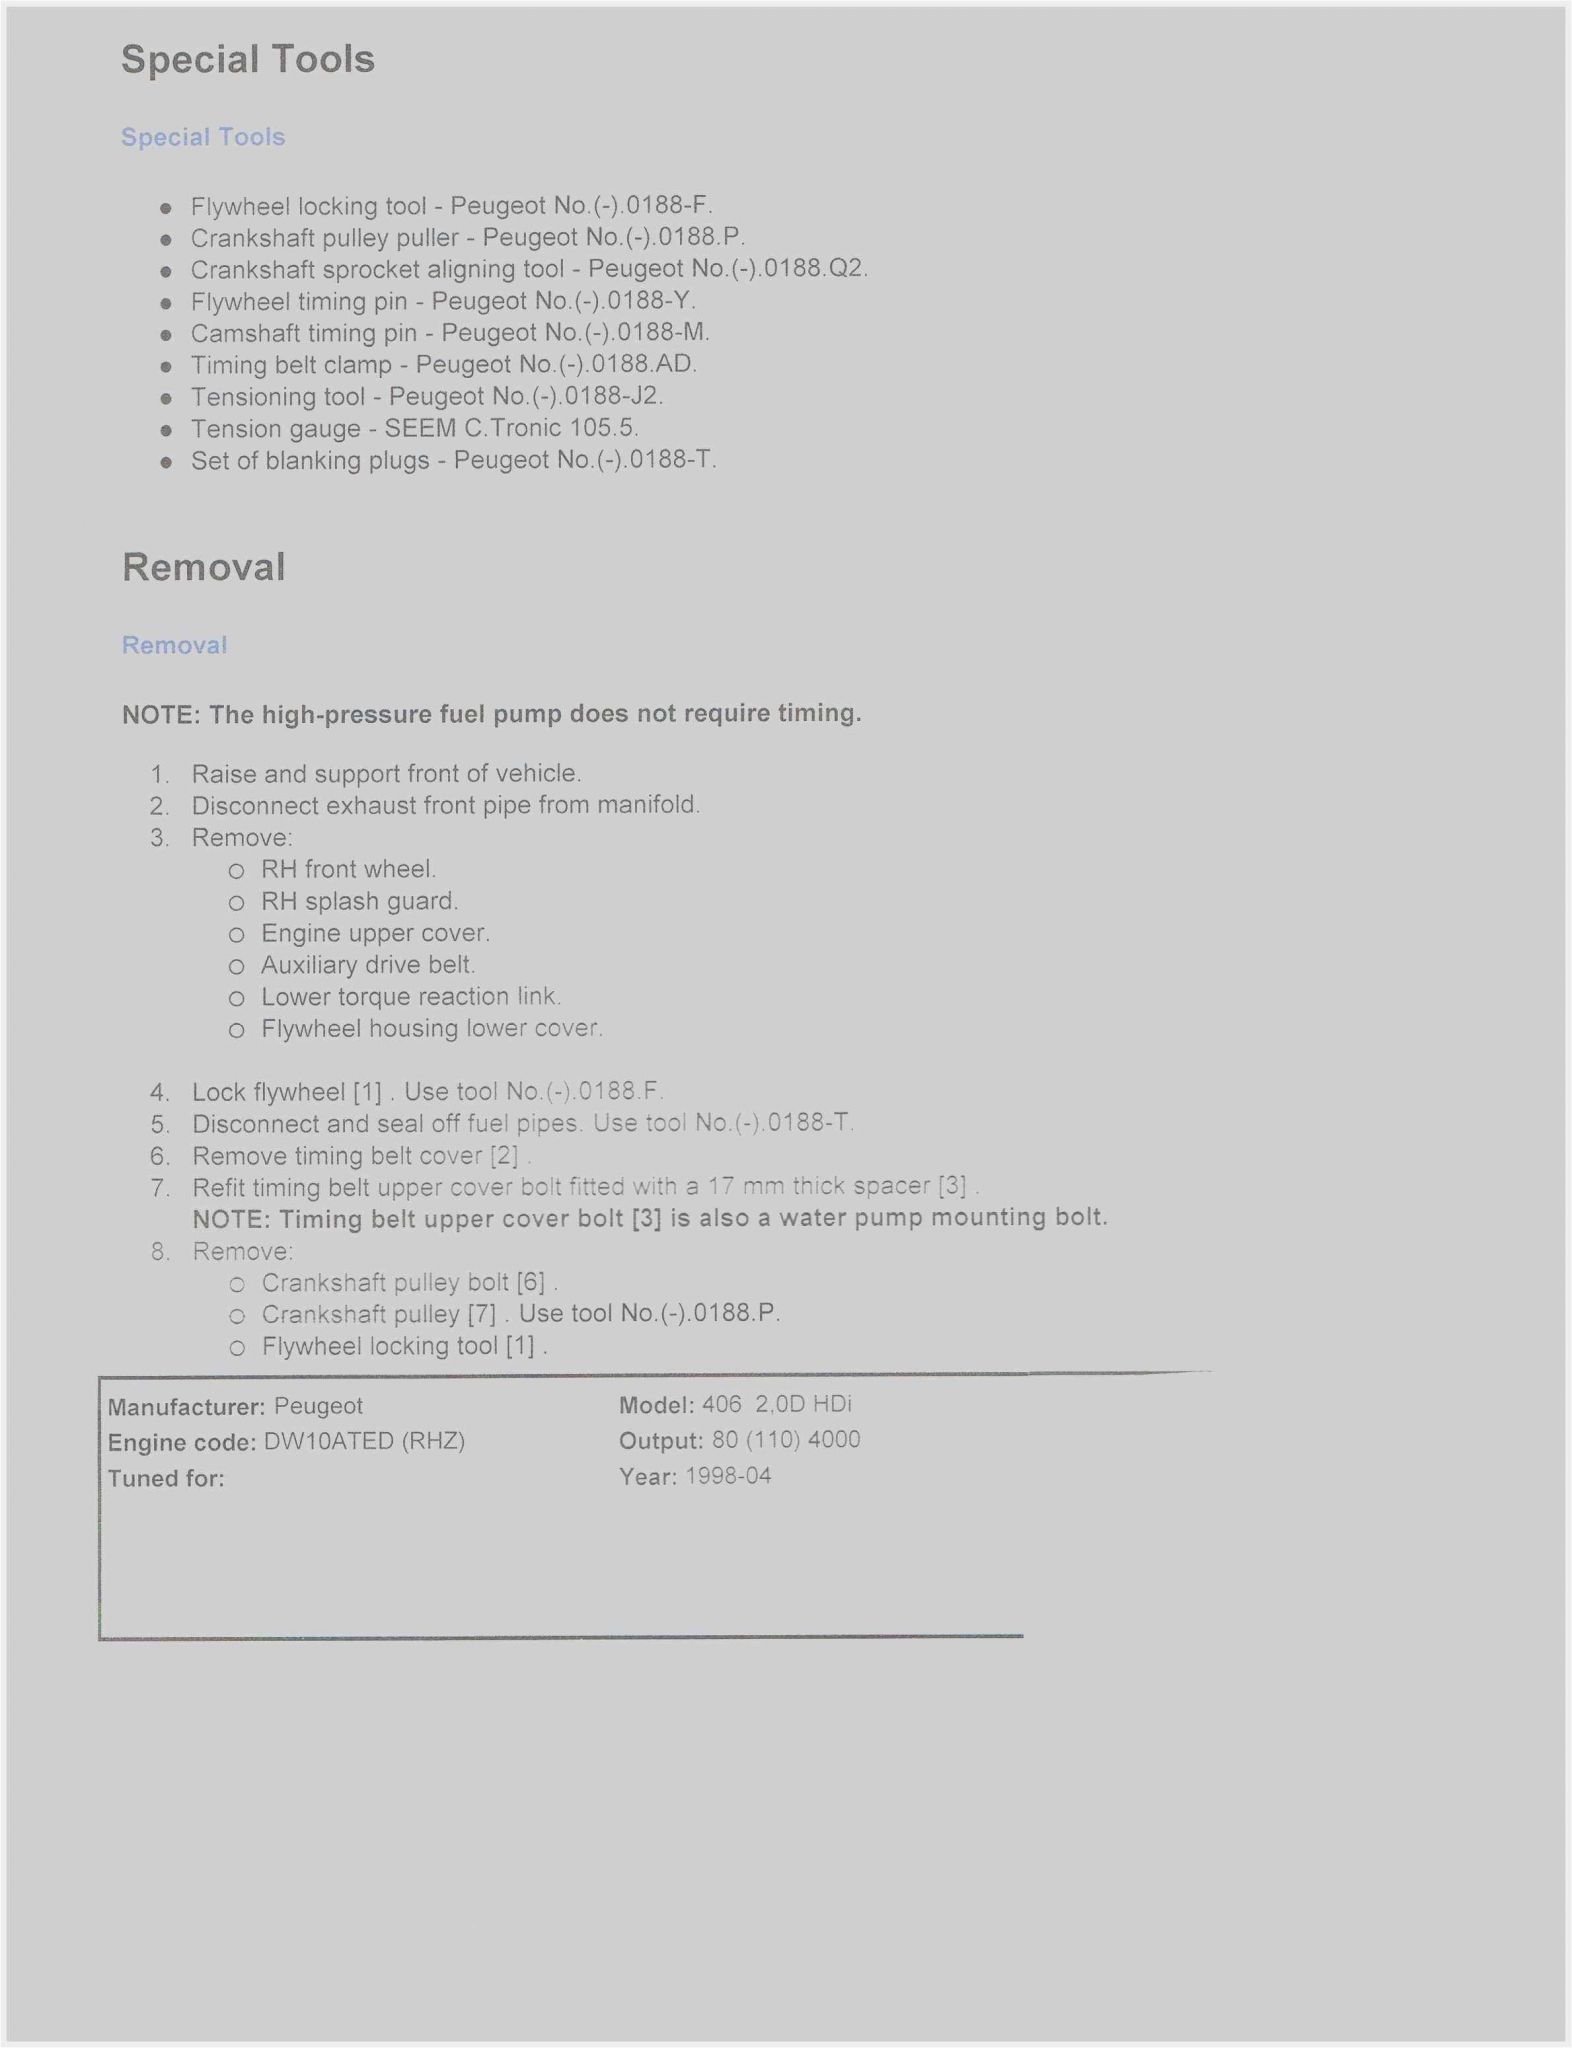 Posting Resume On Indeed format 56 Image